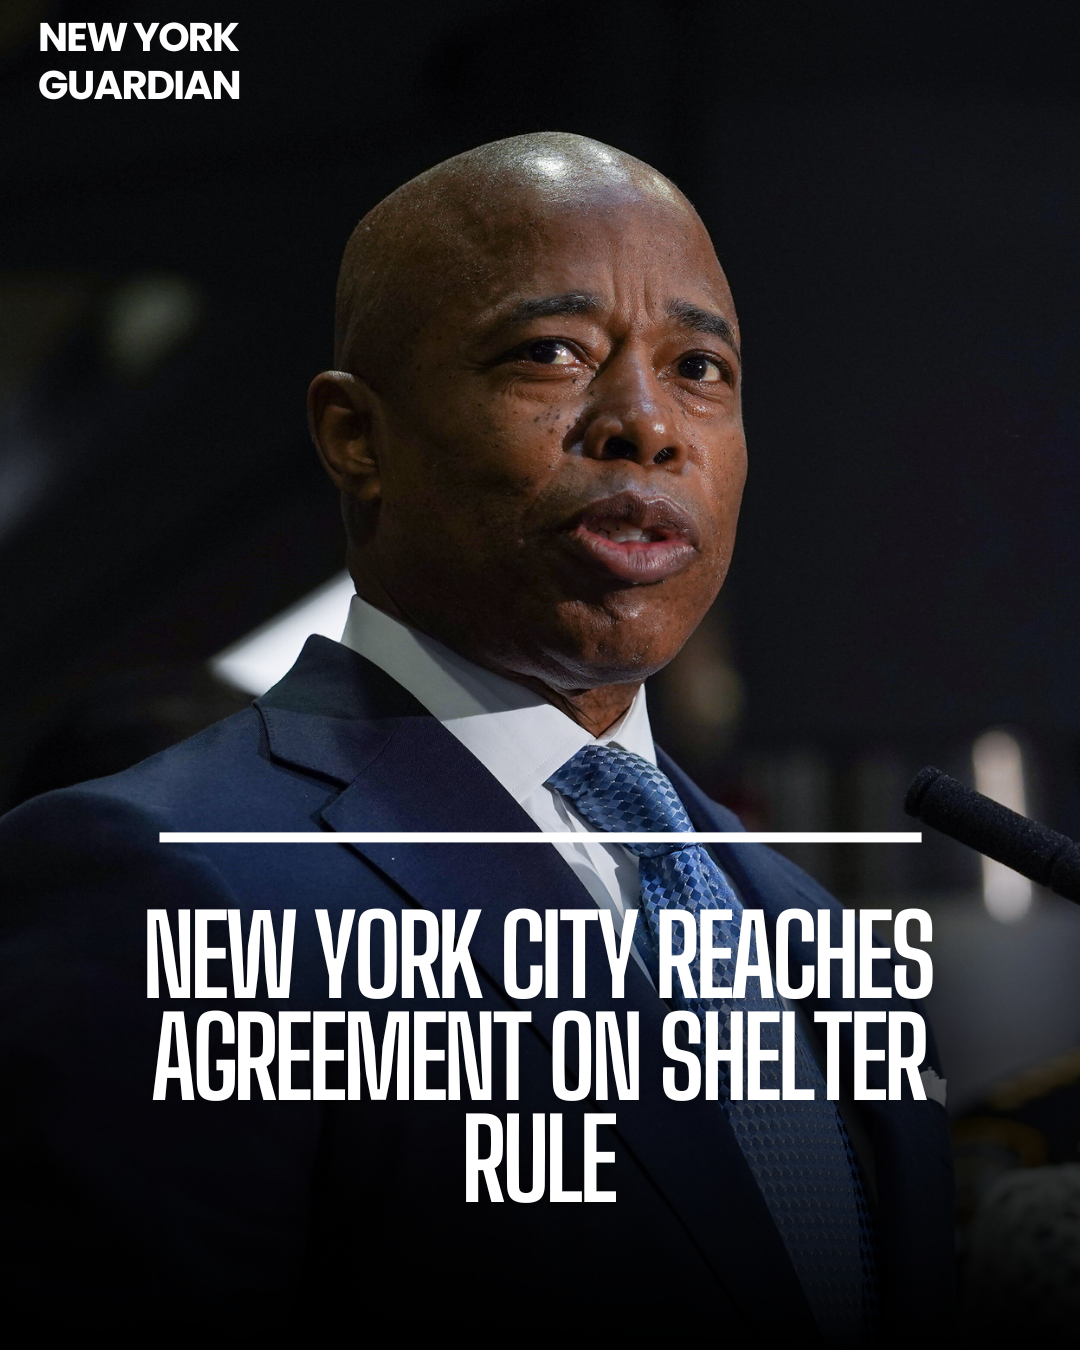 New York City has reached an agreement with the Legal Aid Society about the city's right to shelter rule.